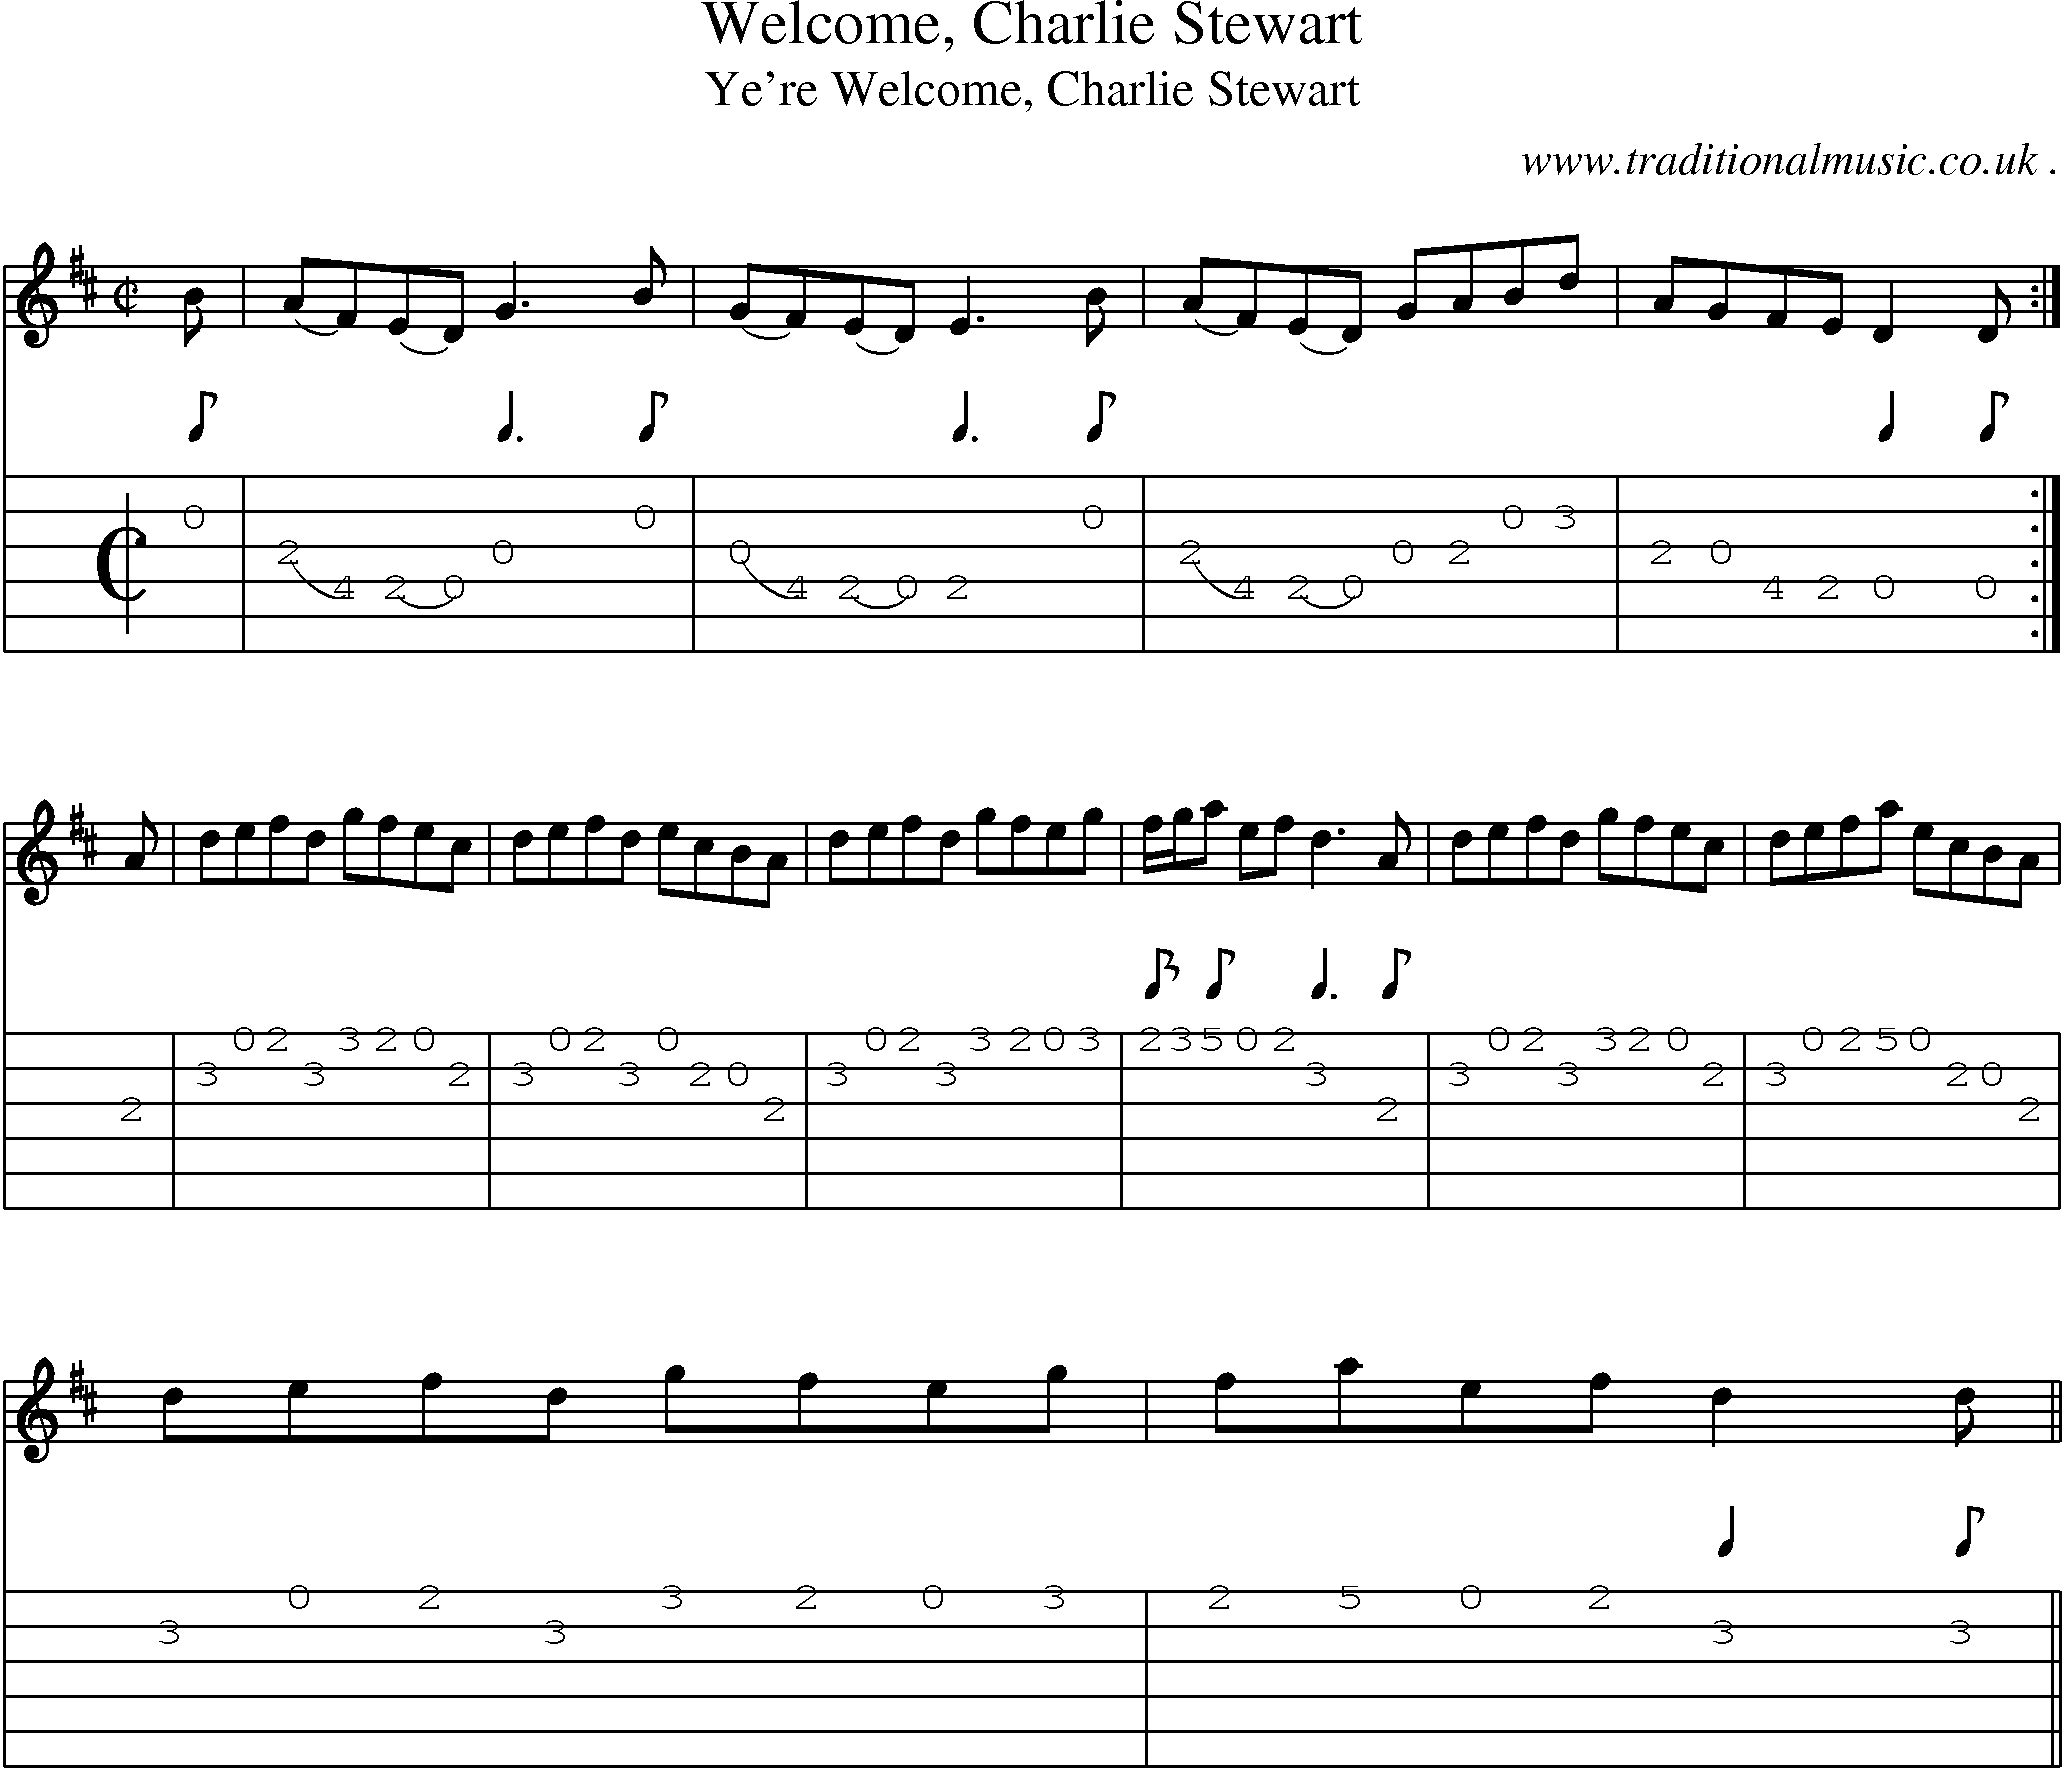 Sheet-music  score, Chords and Guitar Tabs for Welcome Charlie Stewart